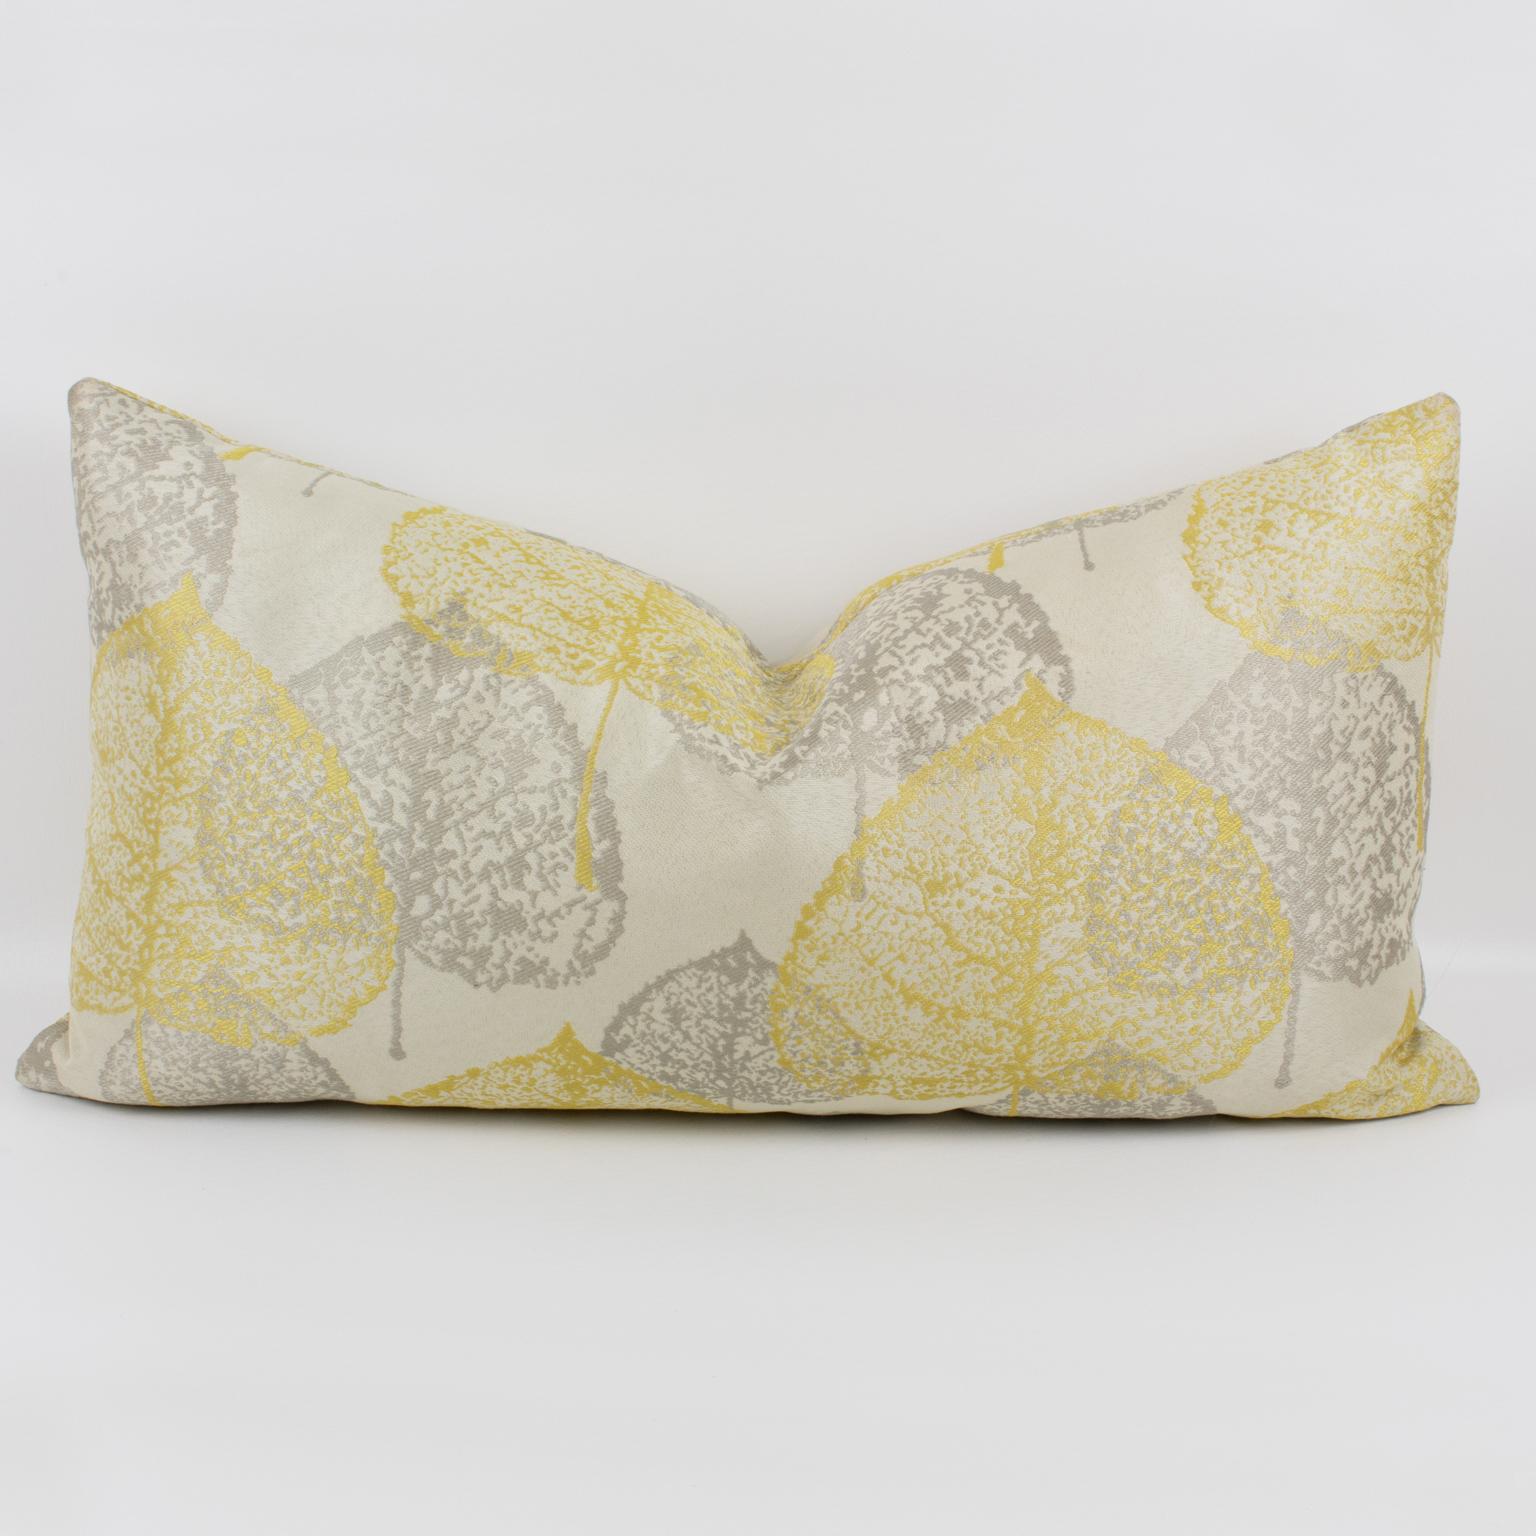 Contemporary Silver Gray and Yellow Damask Throw Pillows, a pair